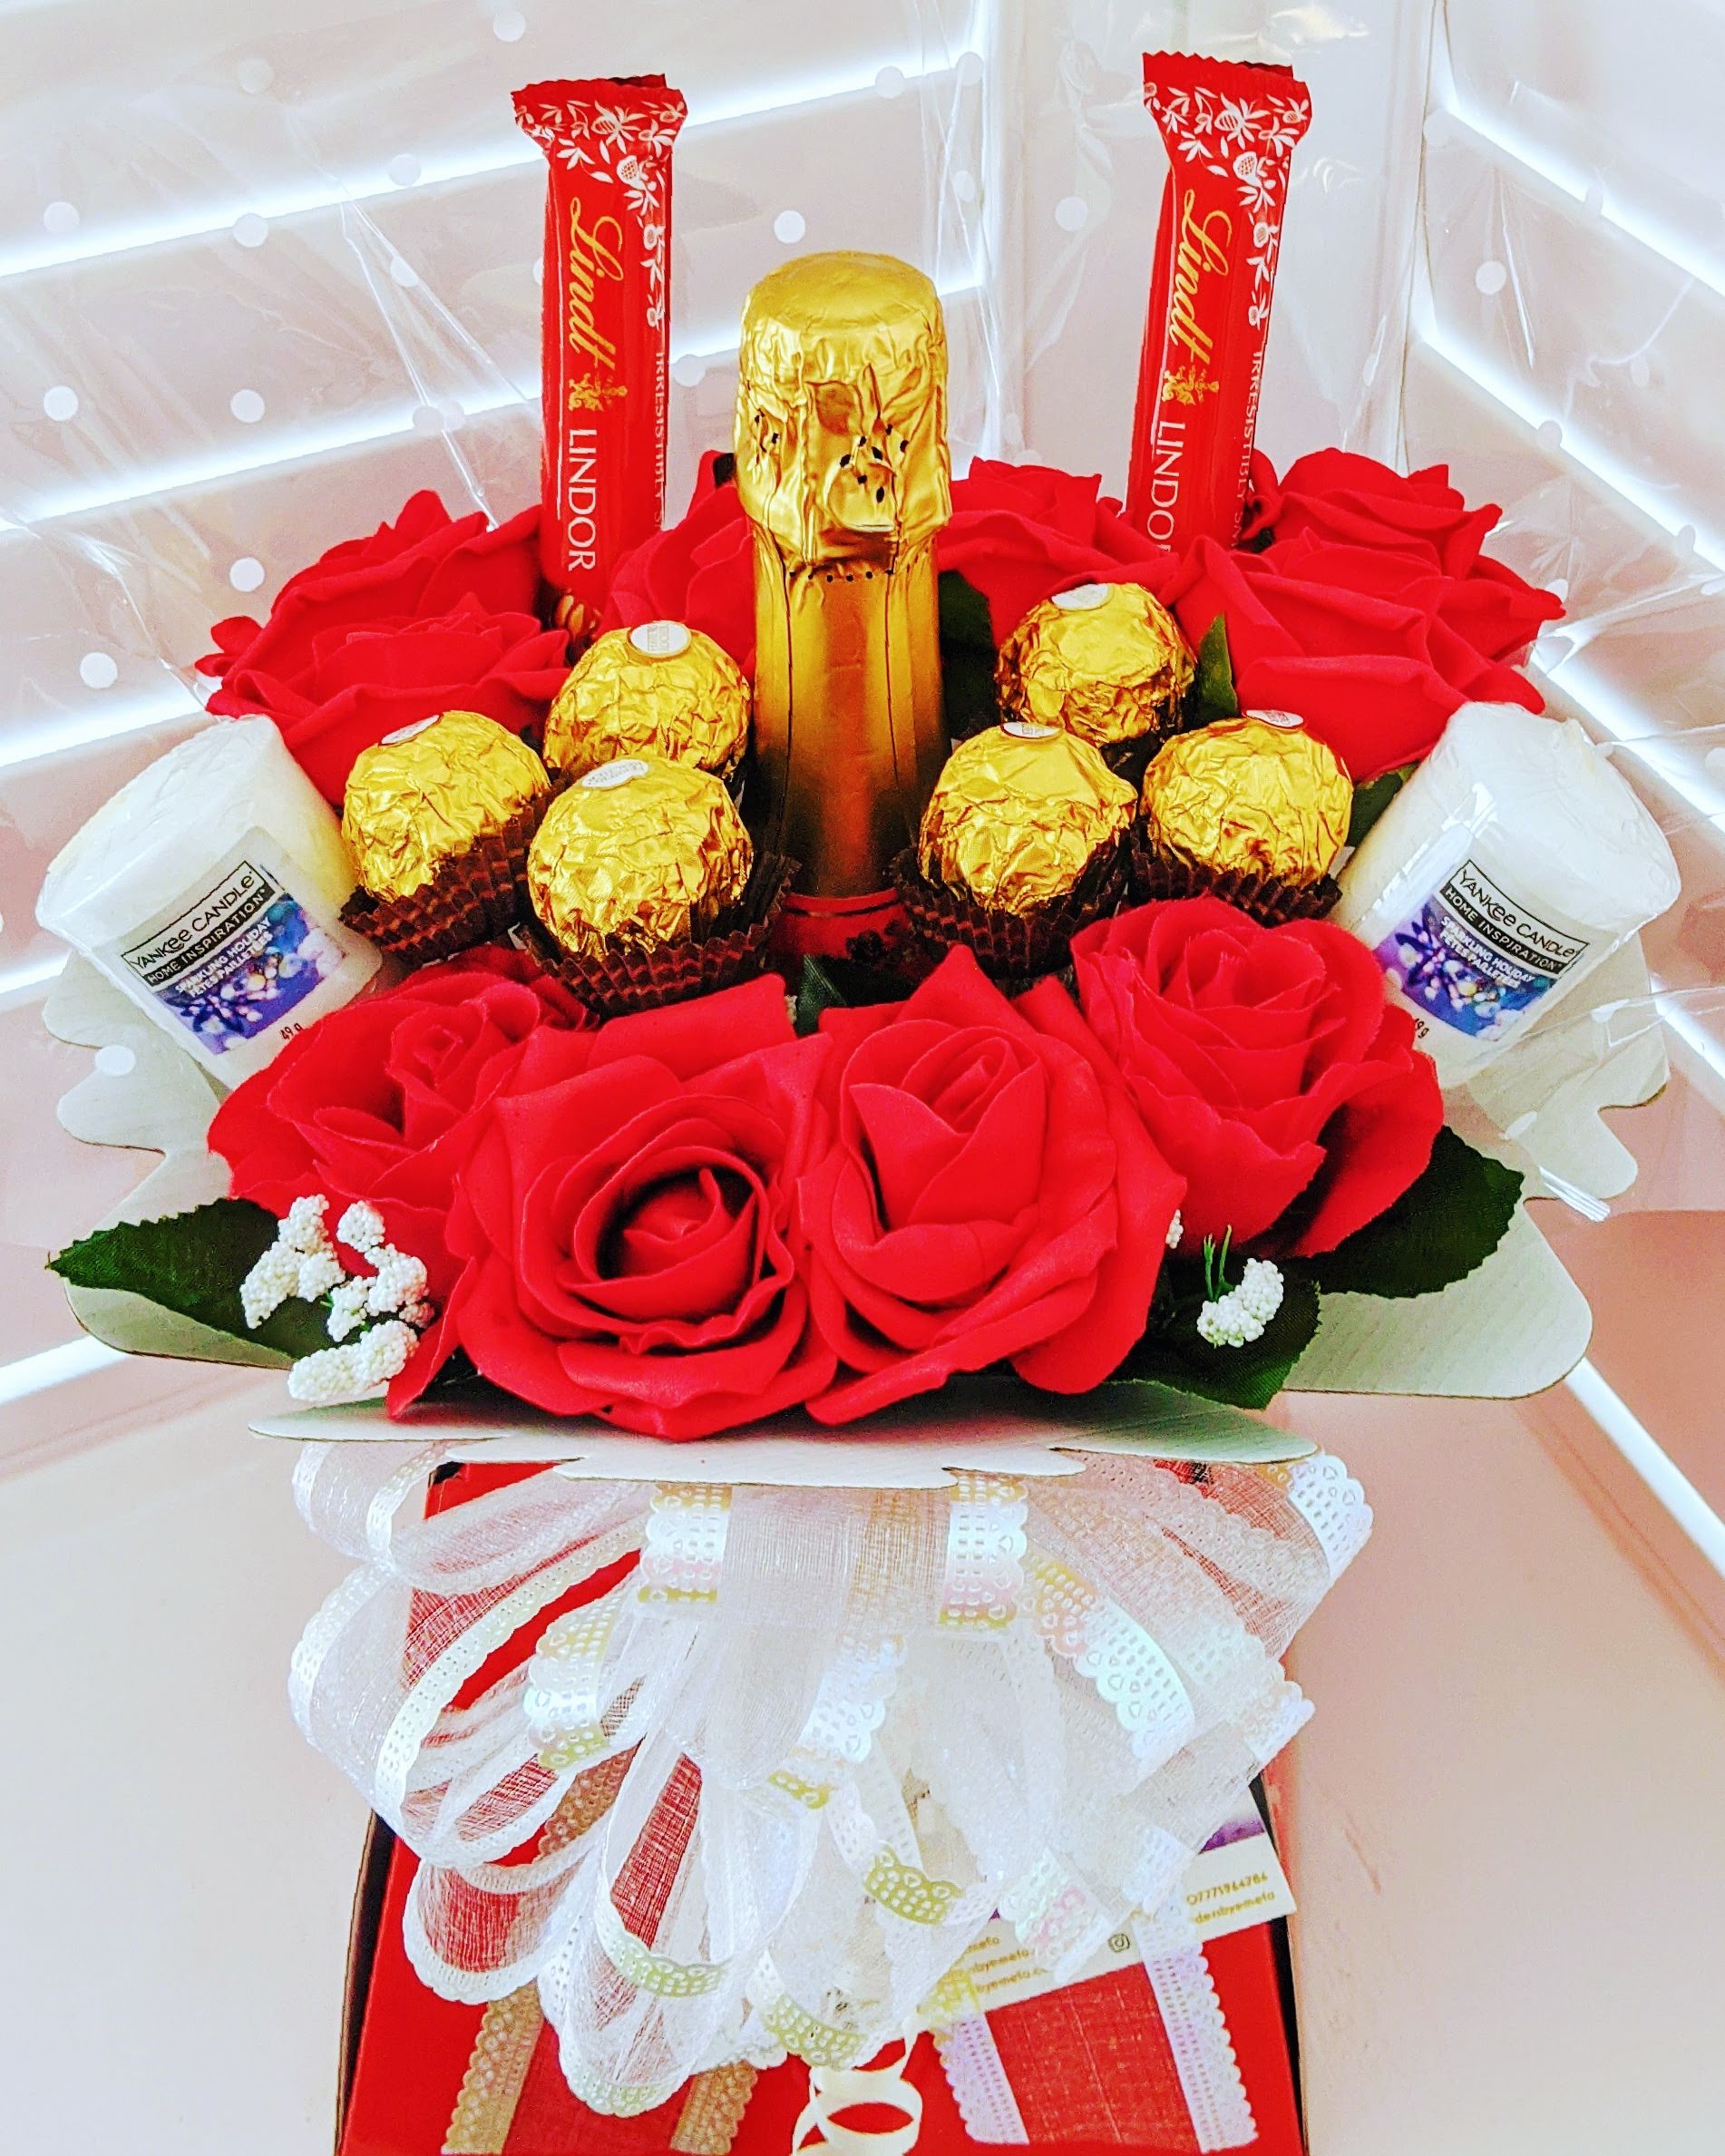 Prosecco Yankee Candles Floral Chocolate Bouquets for your best one